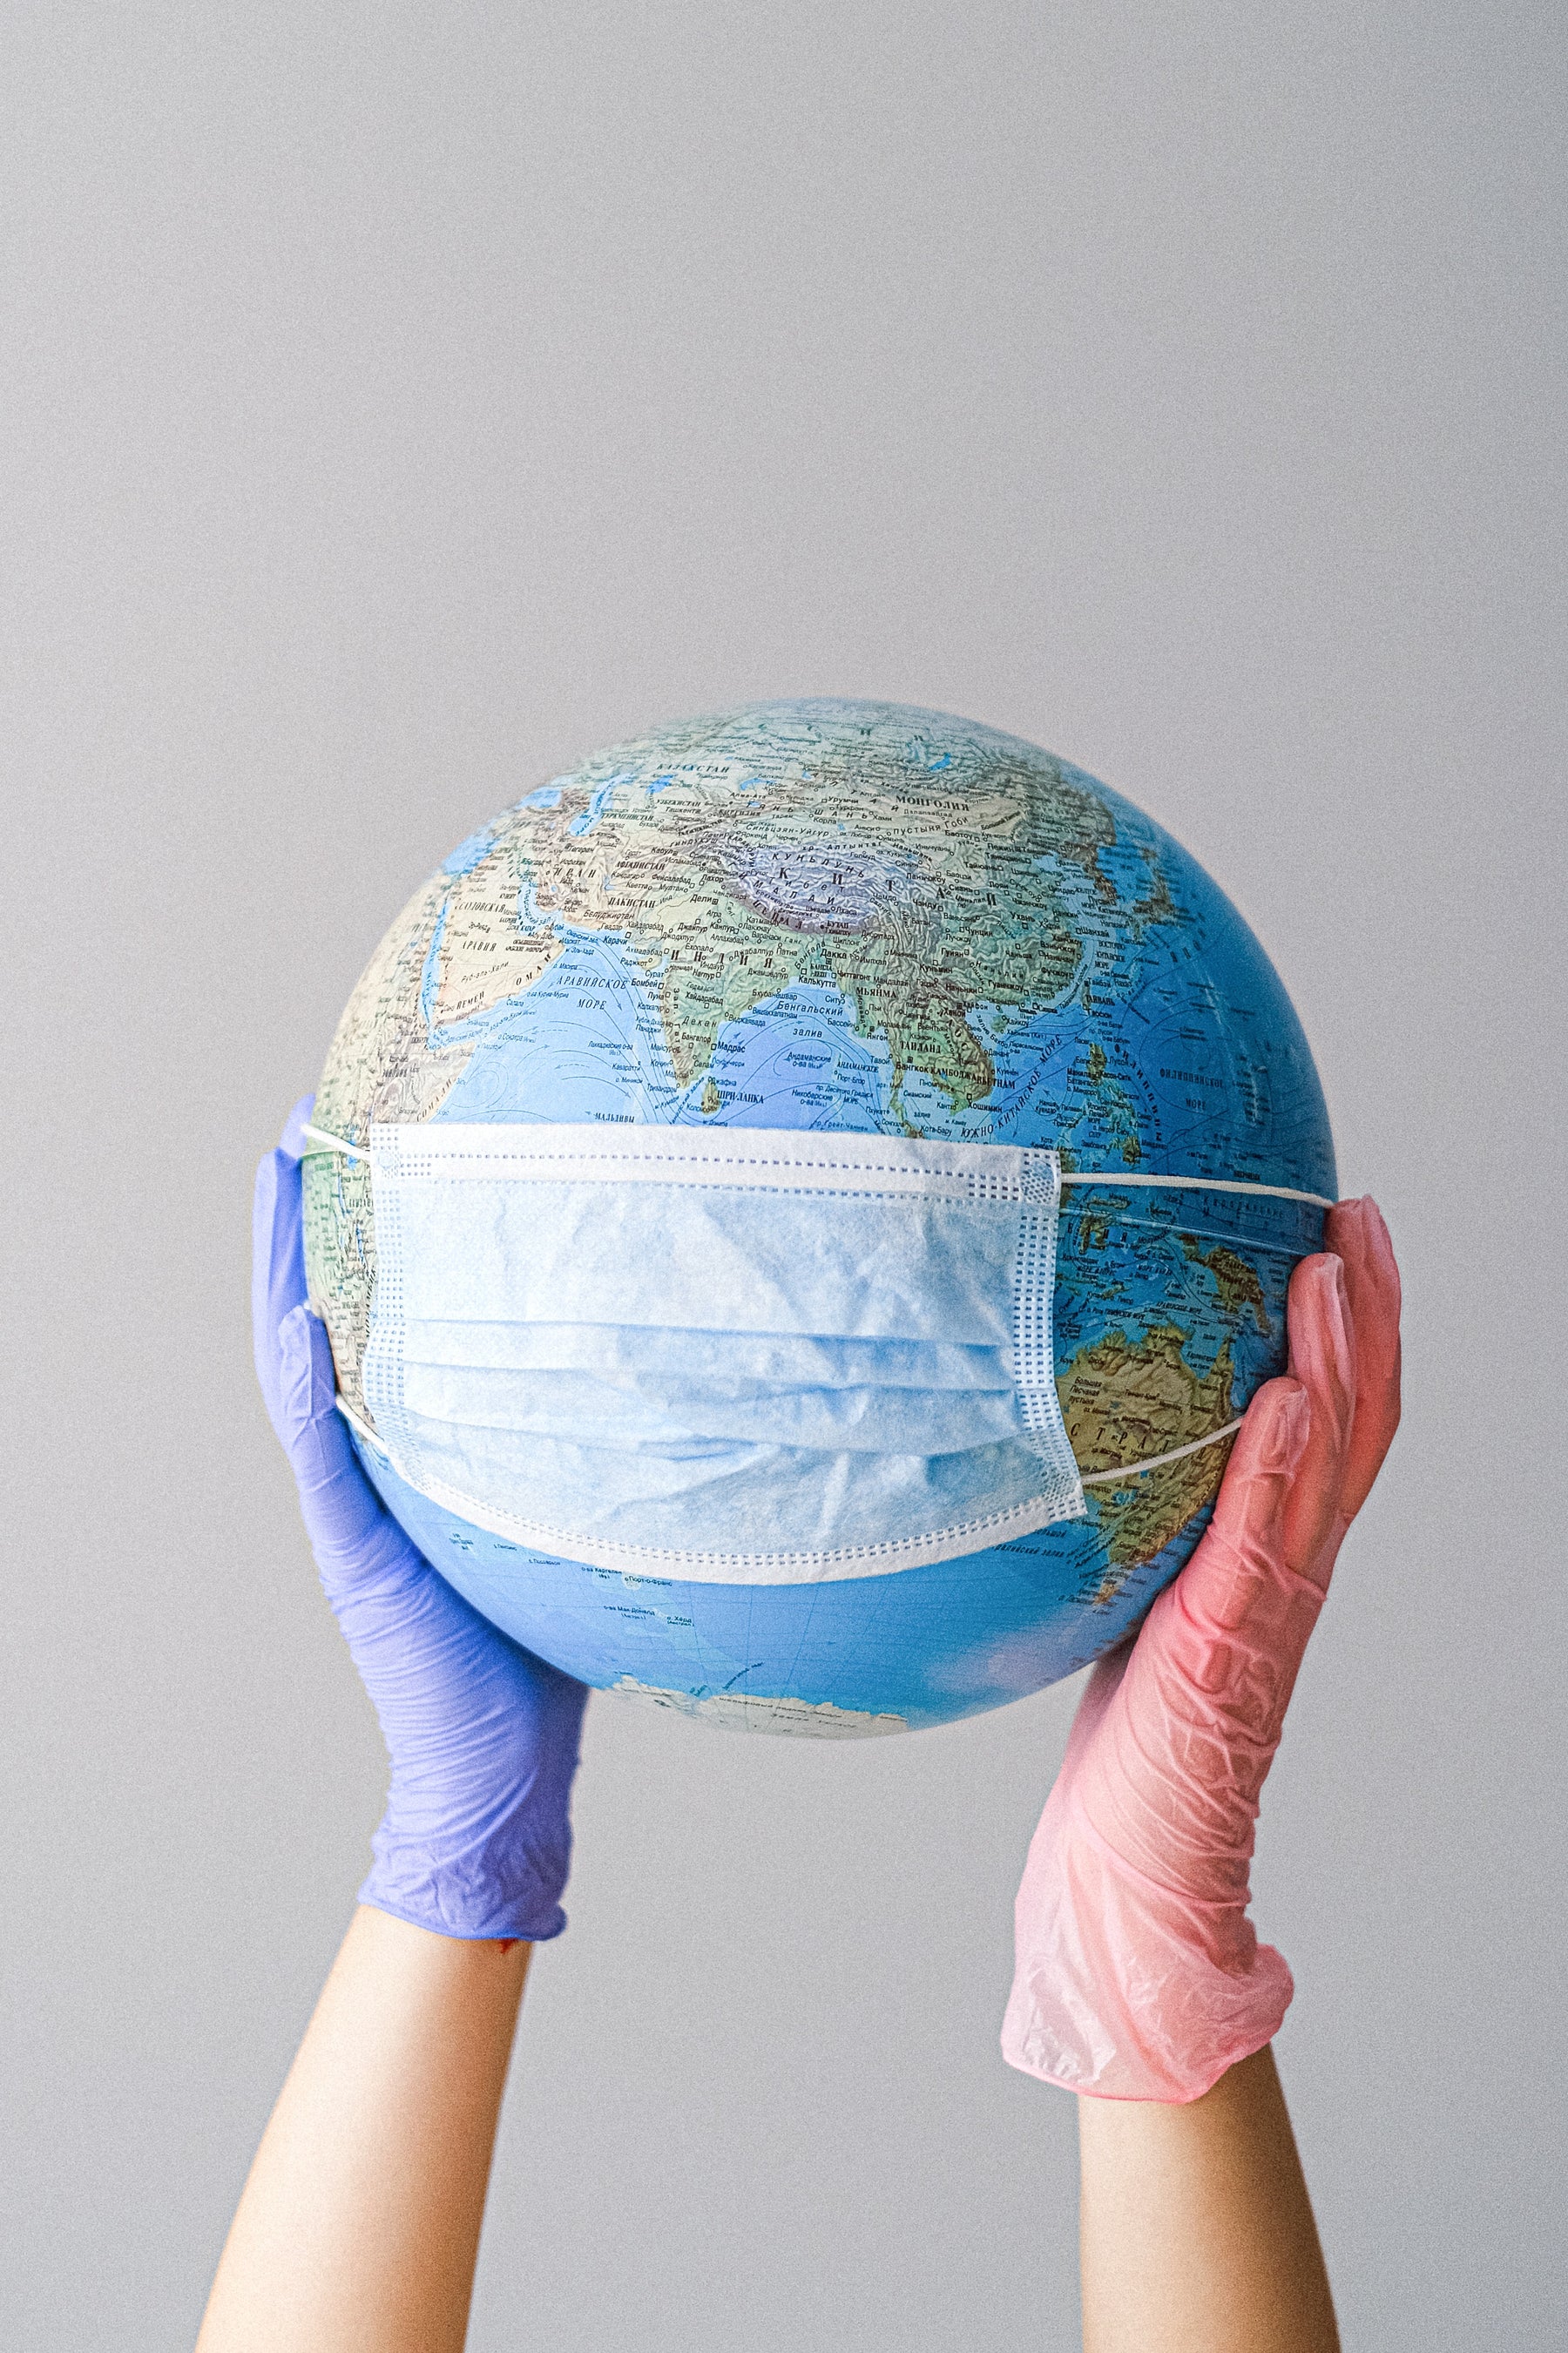 A person with gloved hands holding a globe with a mask 